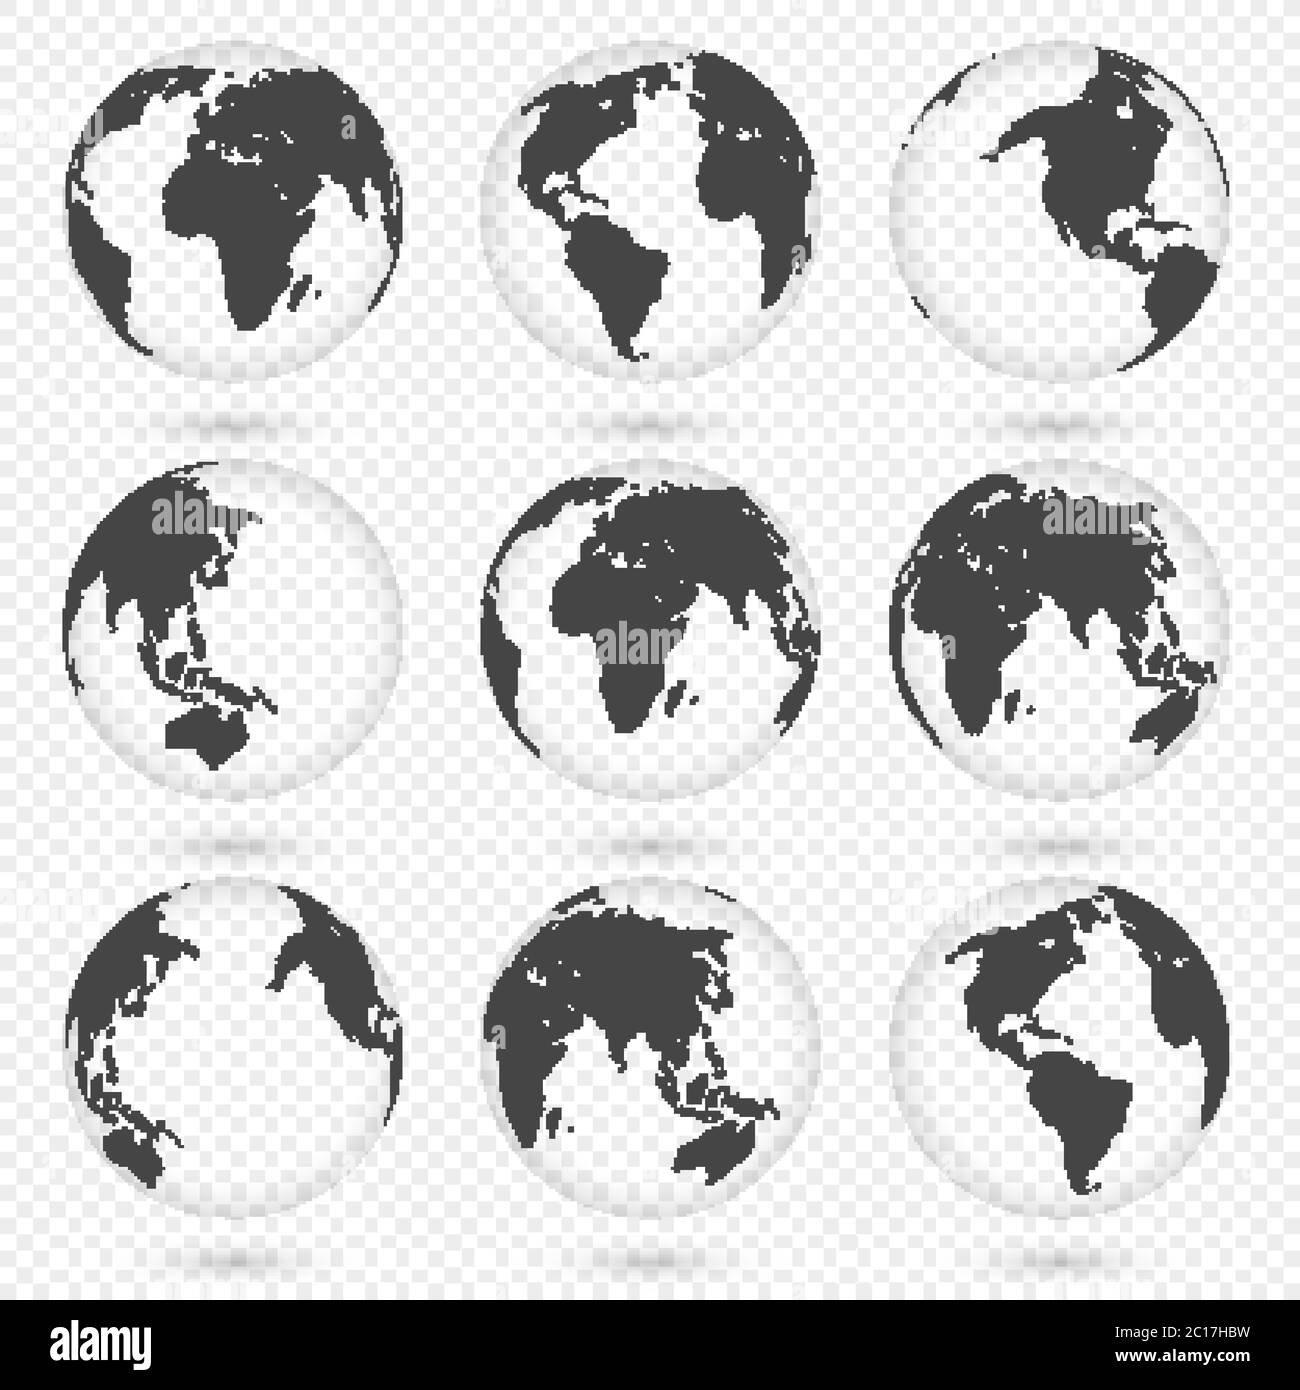 Earth globe. World map set. Planet with continents. Africa, Asia ...